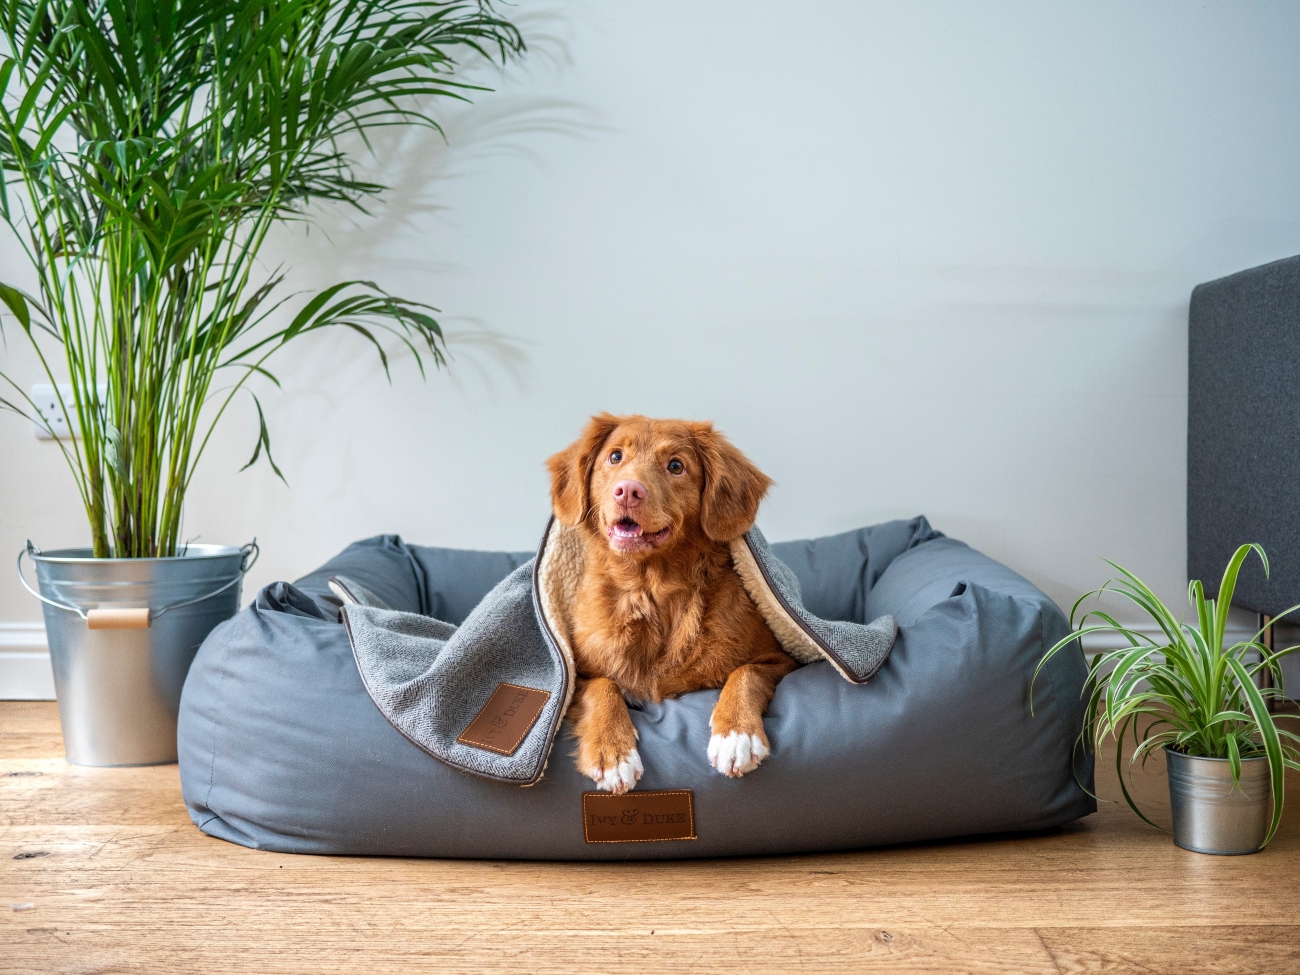 Ginger Dog Lying In a Dog Bed With Blanket